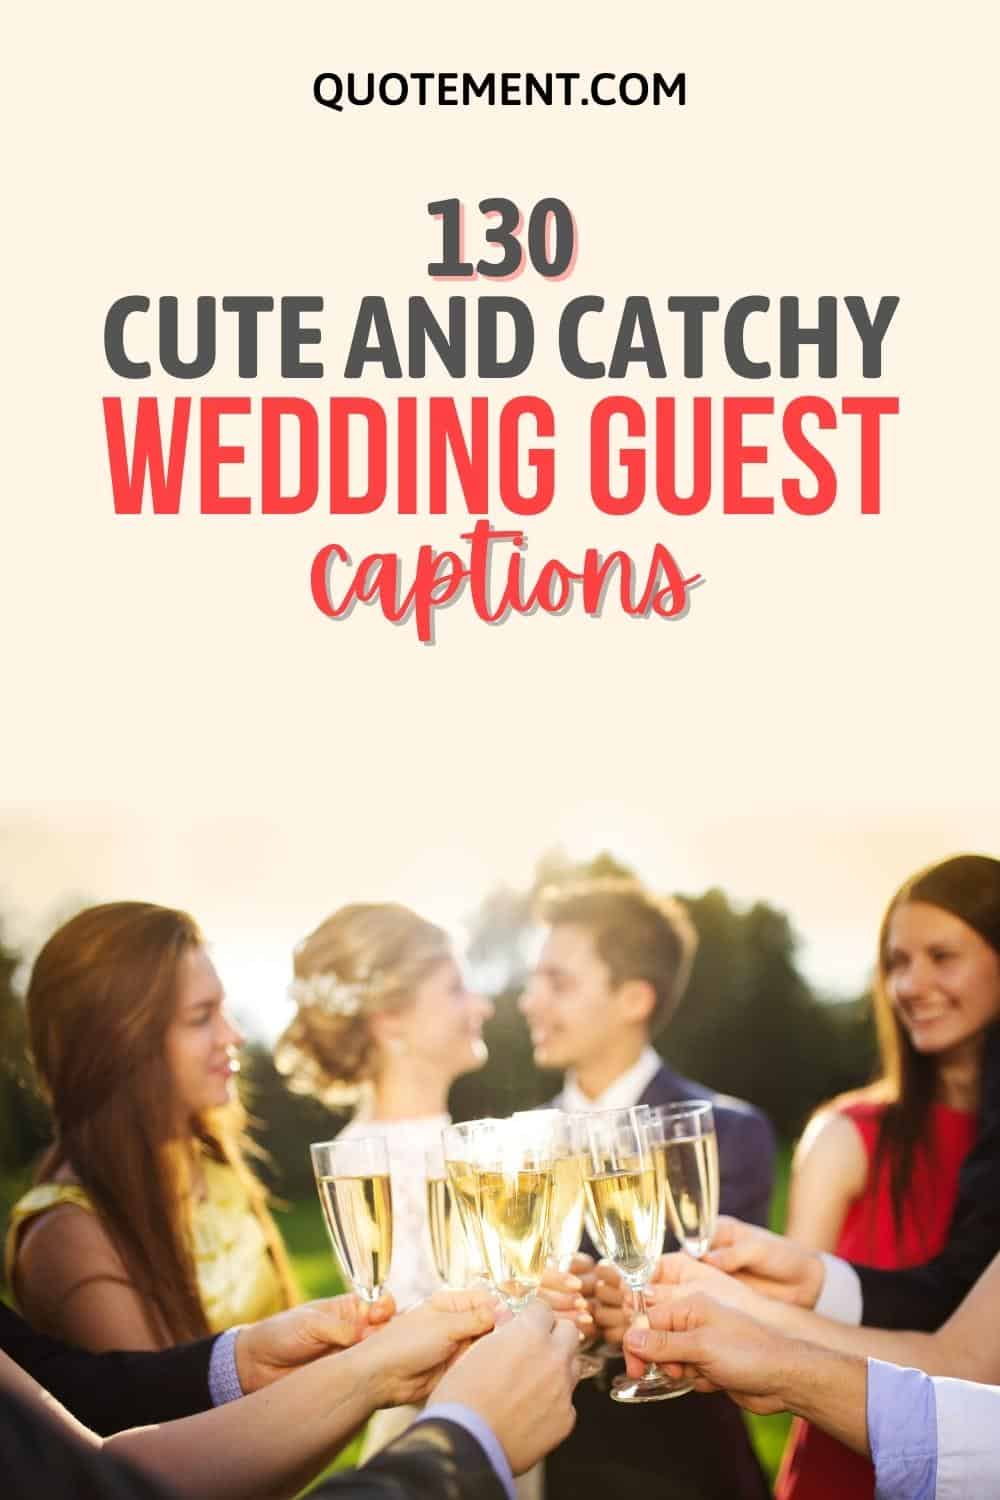 130 Best Wedding Guest Captions To Capture Wedding Vibes
